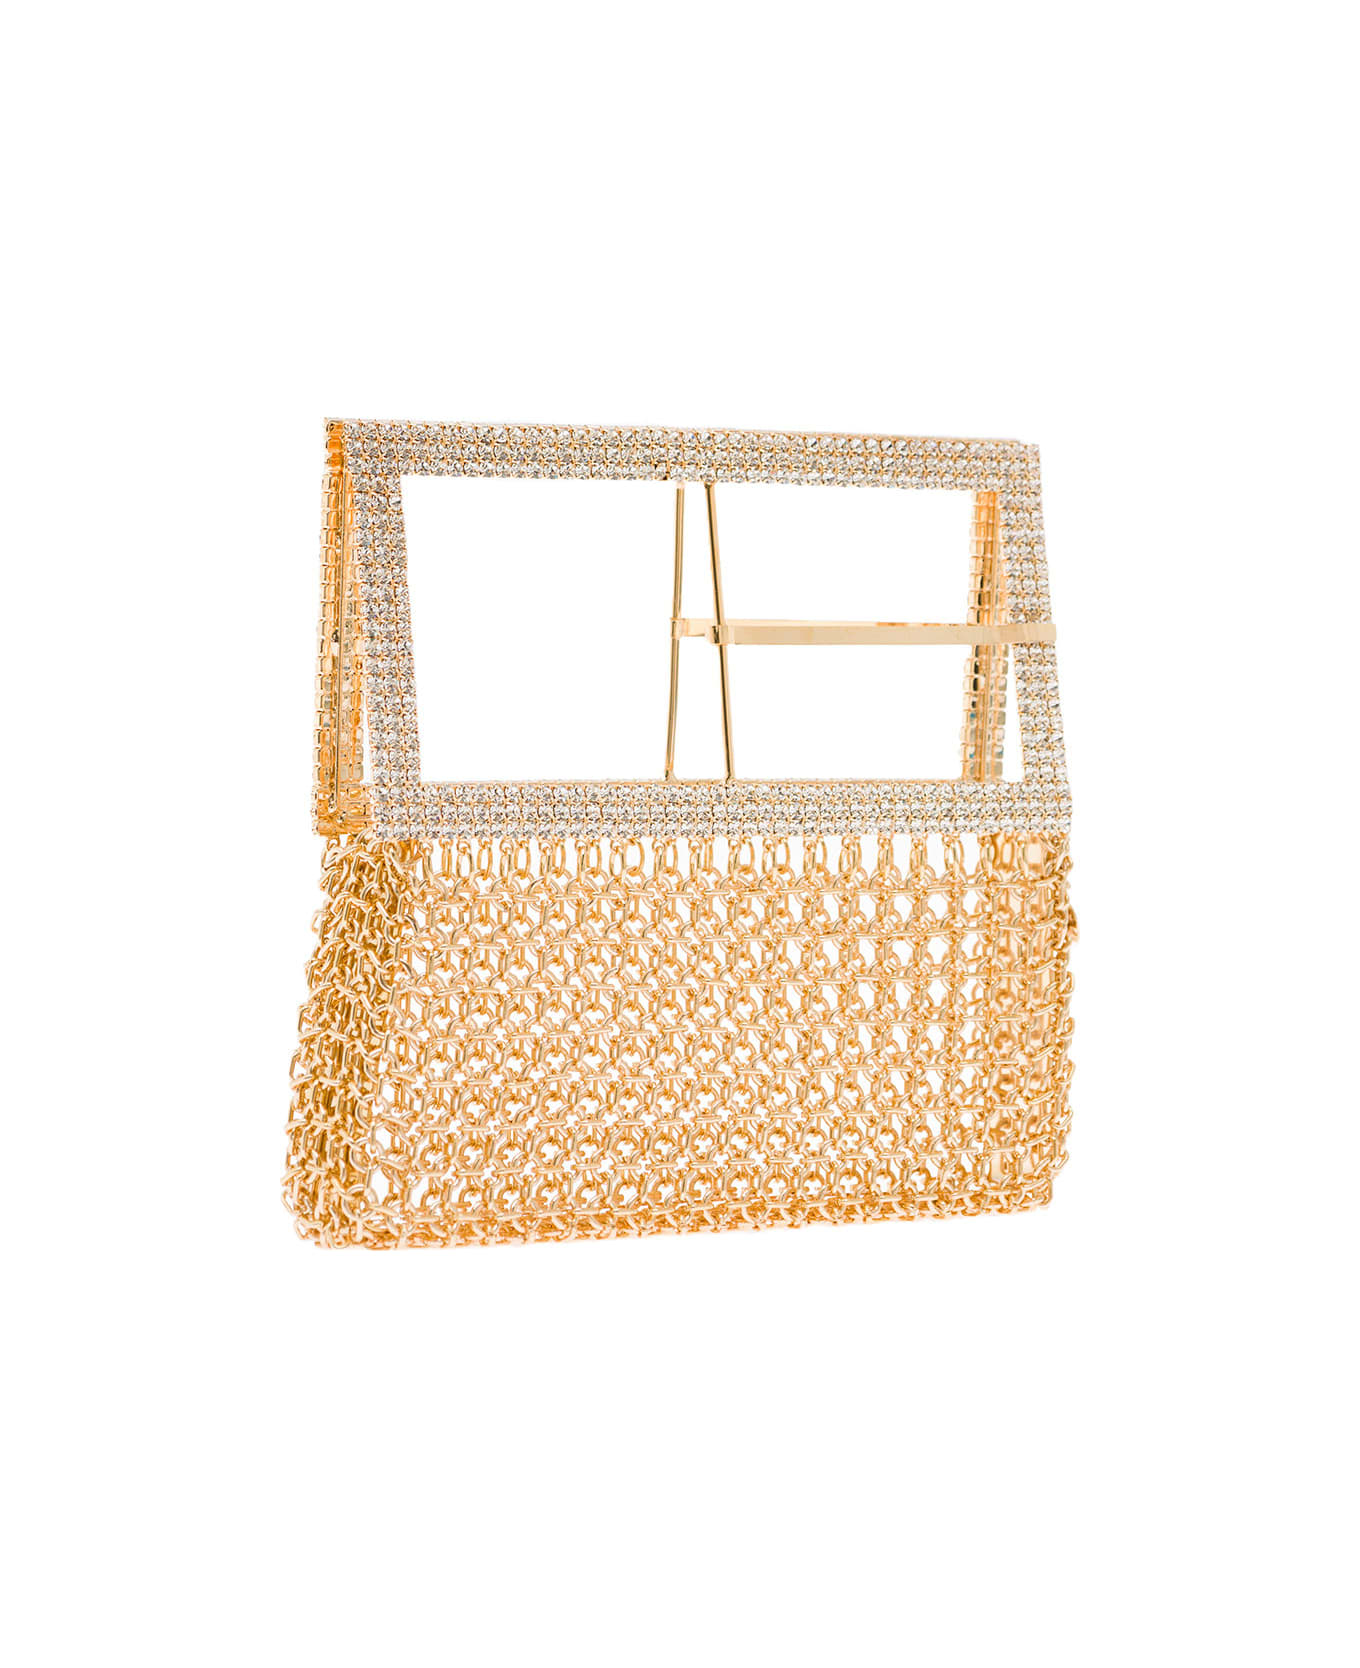 Silvia Gnecchi 'downtown Bag' Gold-colored Shoulder Bag With Maxi Buckle In Metal Mesh Woman - Metallic